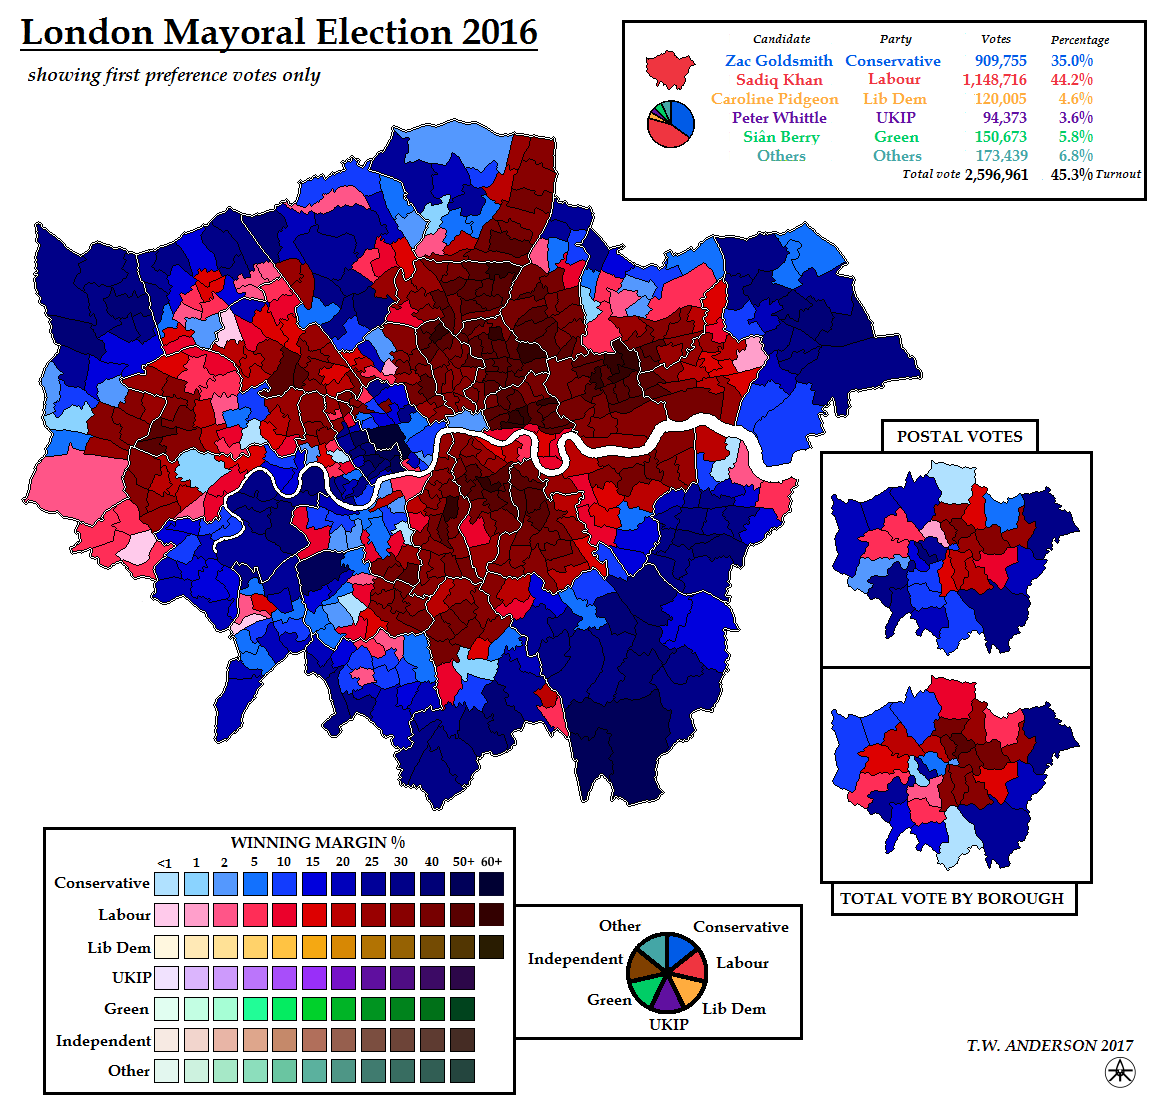 OTL Election maps resources thread | Page 335 ...